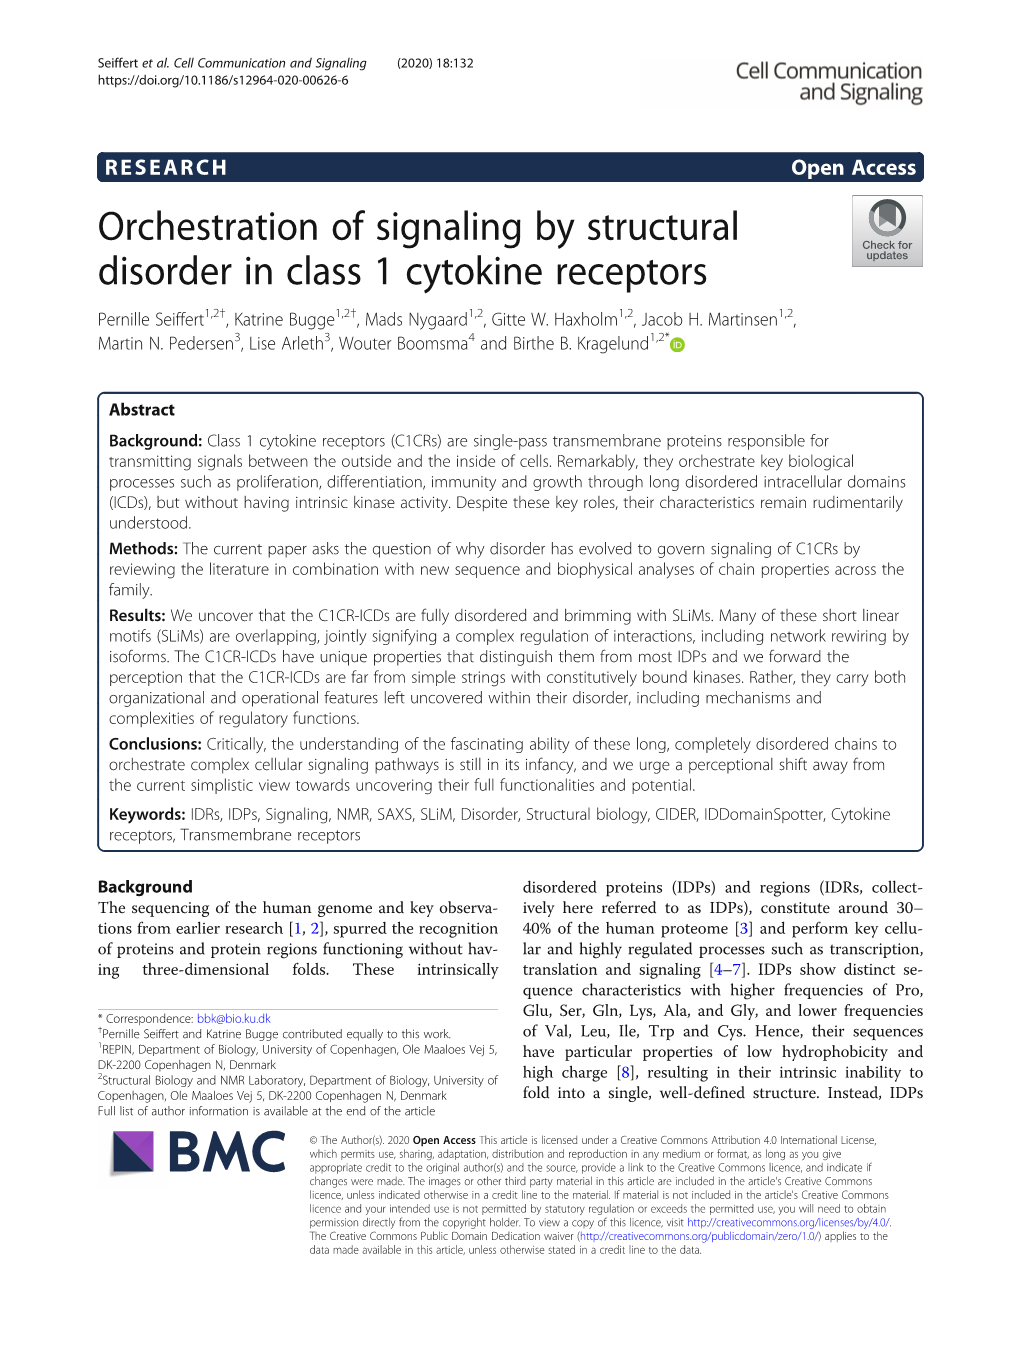 Orchestration of Signaling by Structural Disorder in Class 1 Cytokine Receptors Pernille Seiffert1,2†, Katrine Bugge1,2†, Mads Nygaard1,2, Gitte W